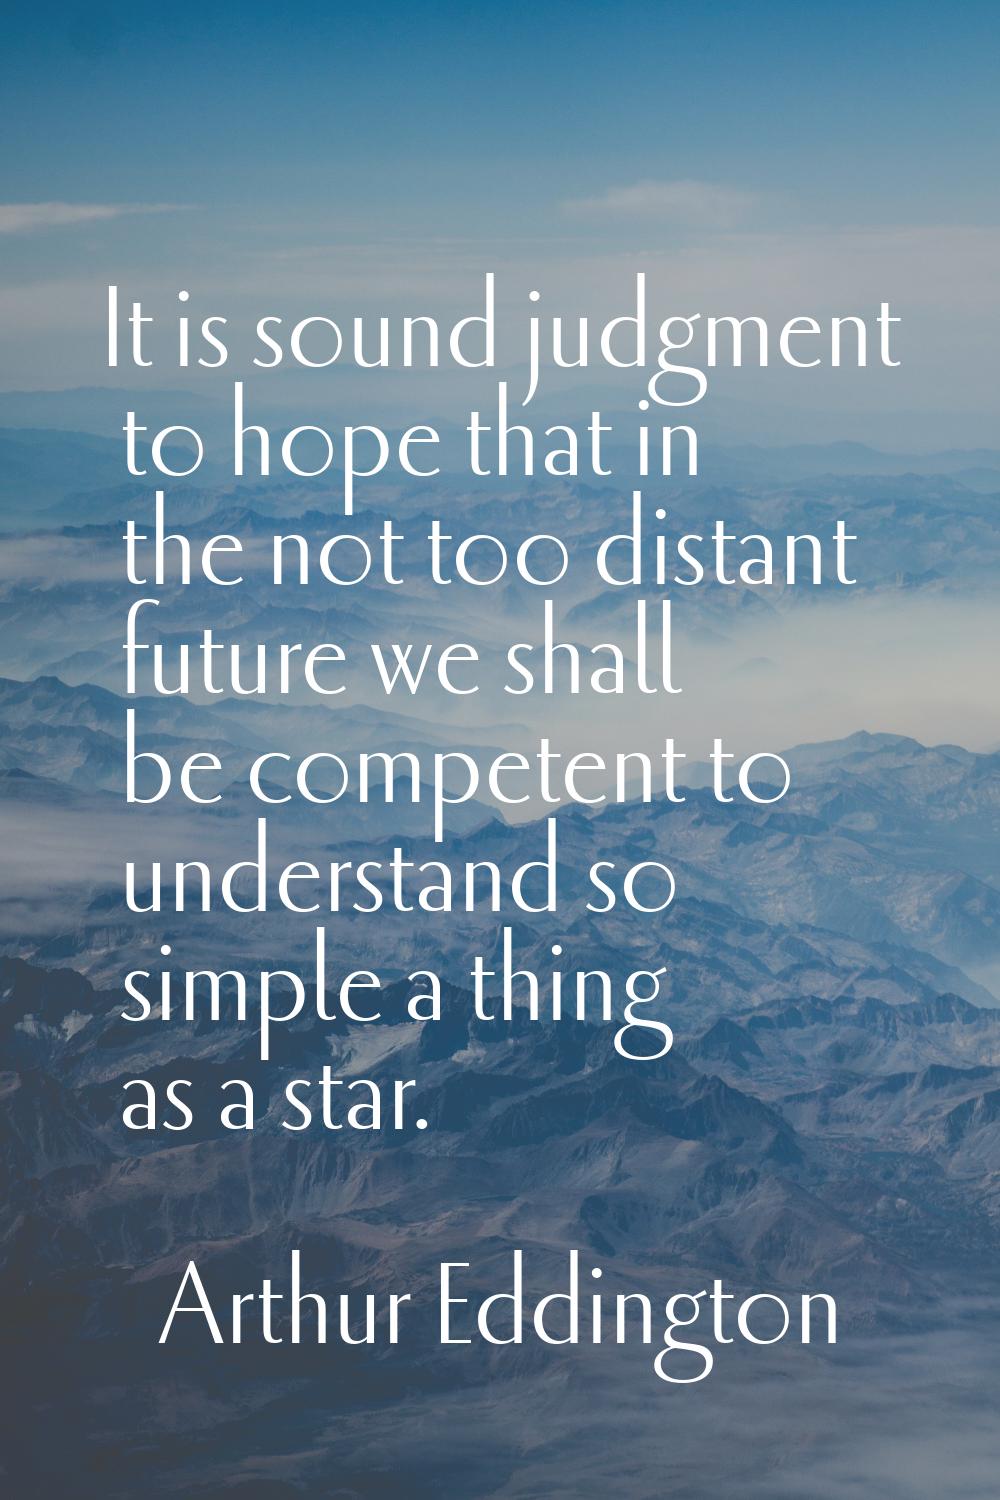 It is sound judgment to hope that in the not too distant future we shall be competent to understand